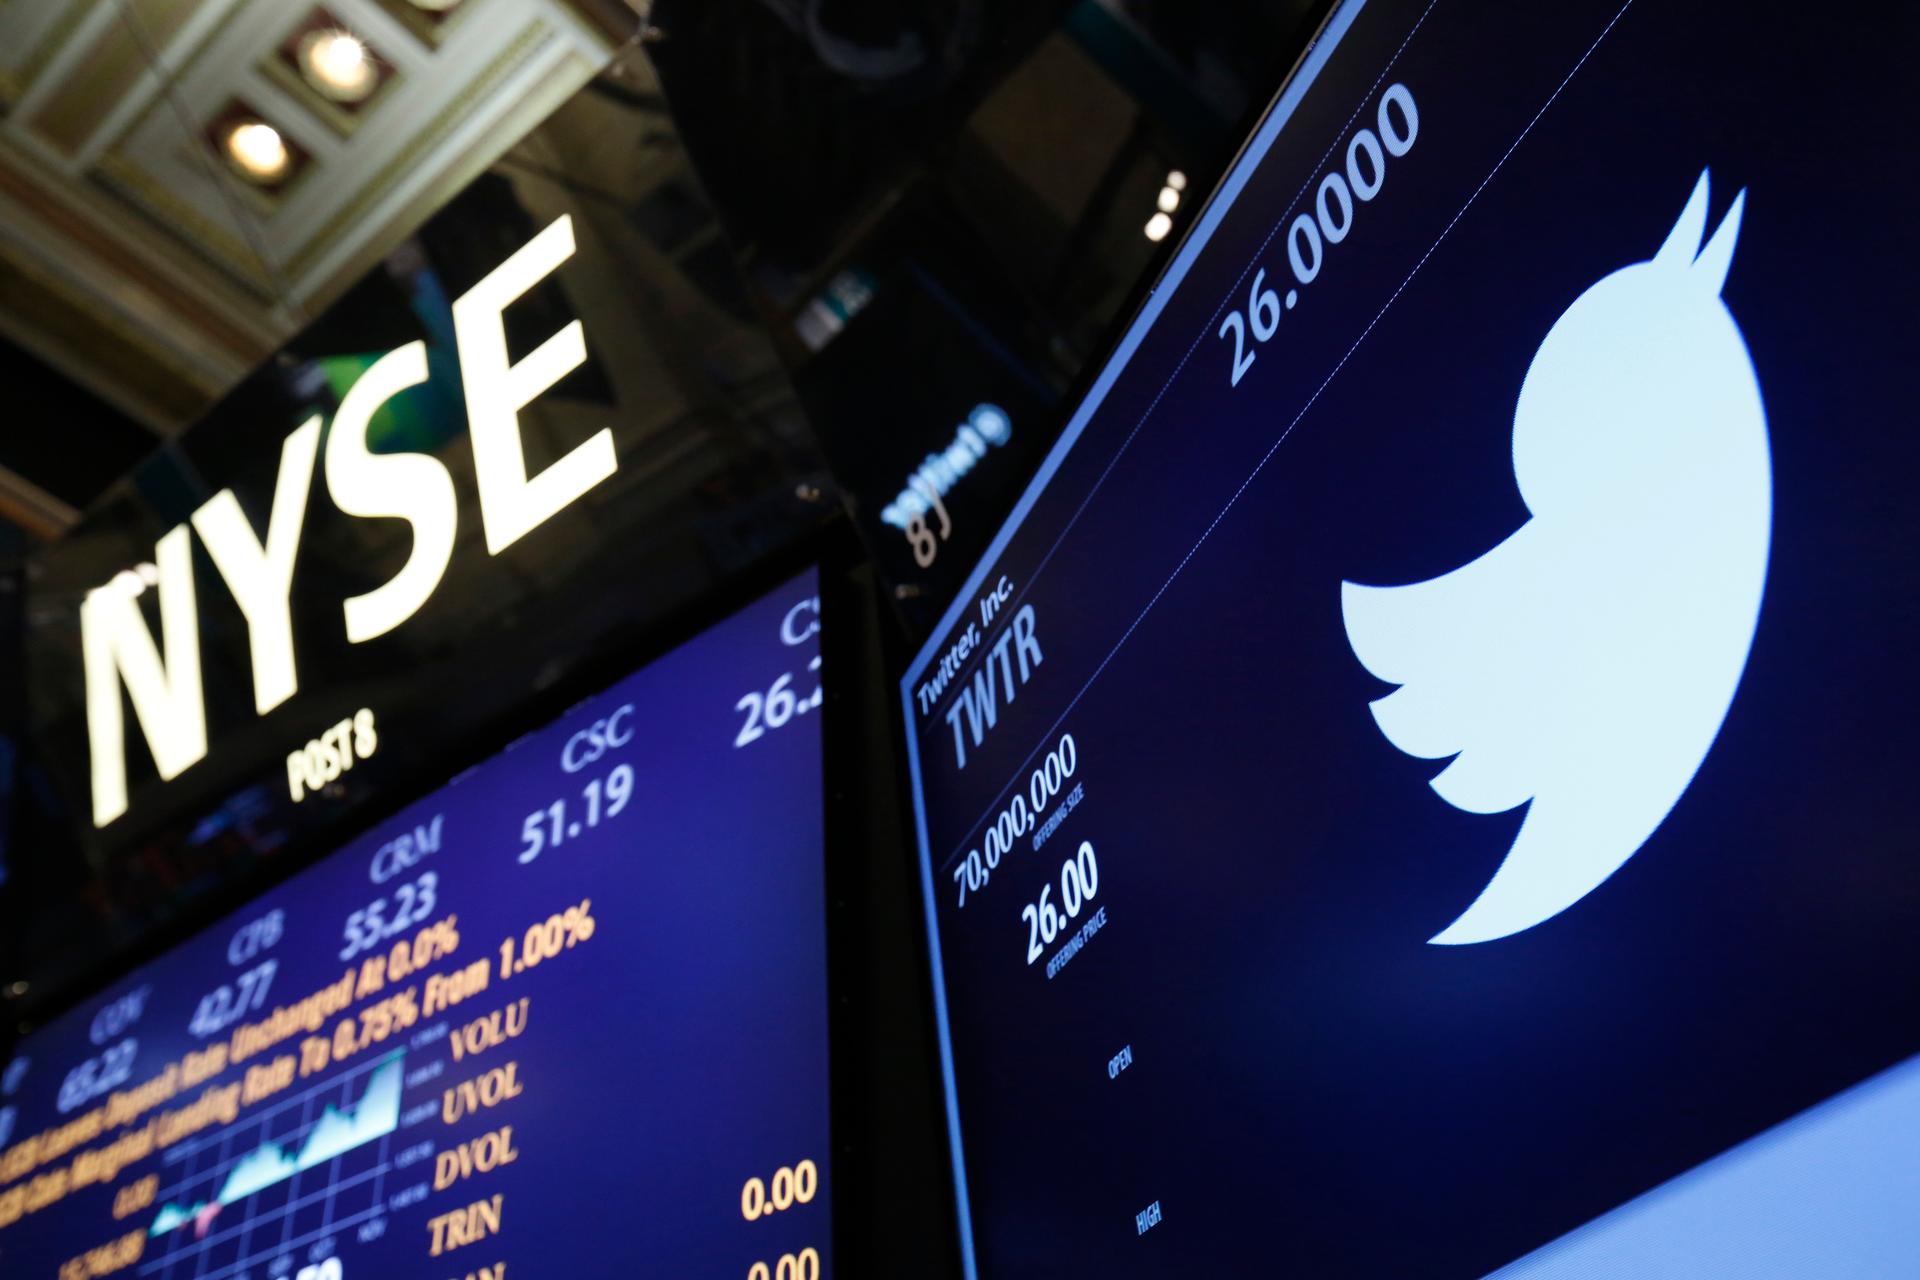 The Twitter logo is seen on the floor at the New York Stock Exchange